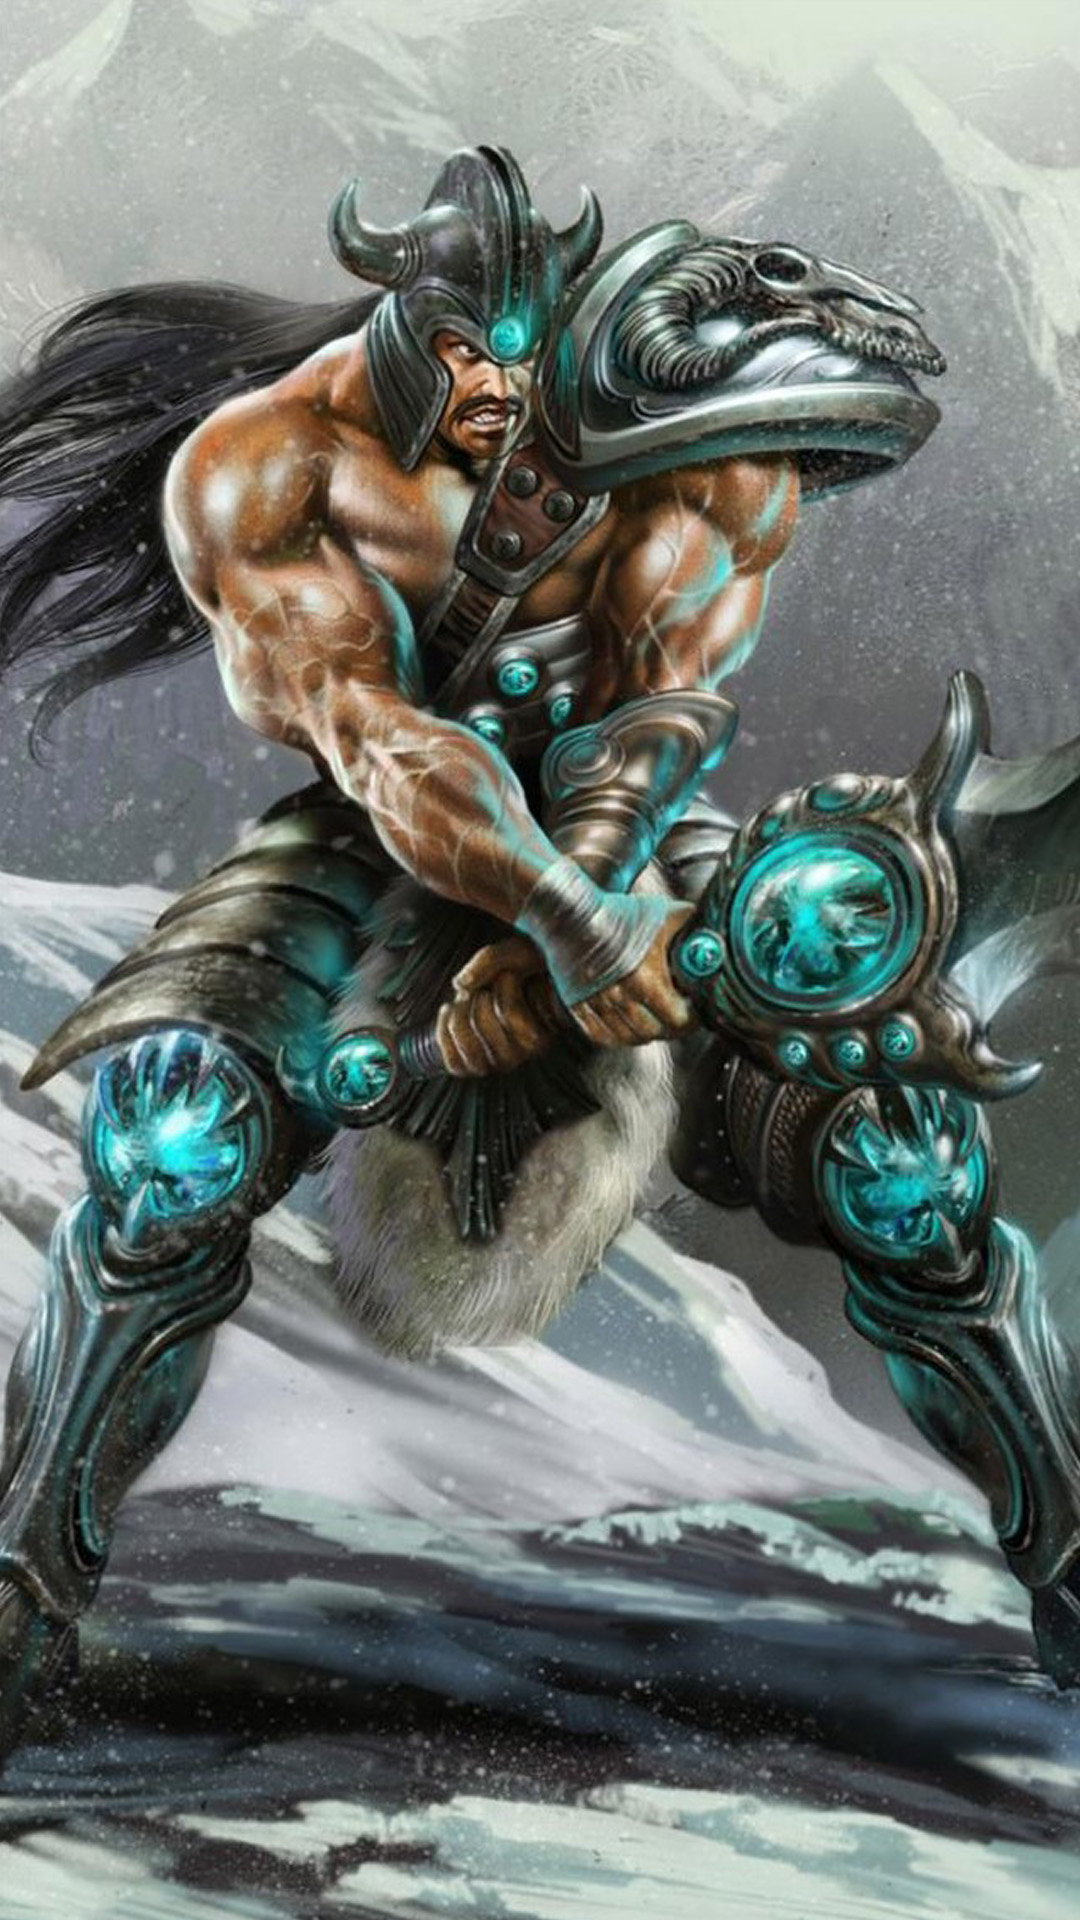 games hd wallpapers for android,mythology,cg artwork,fictional character,illustration,muscle